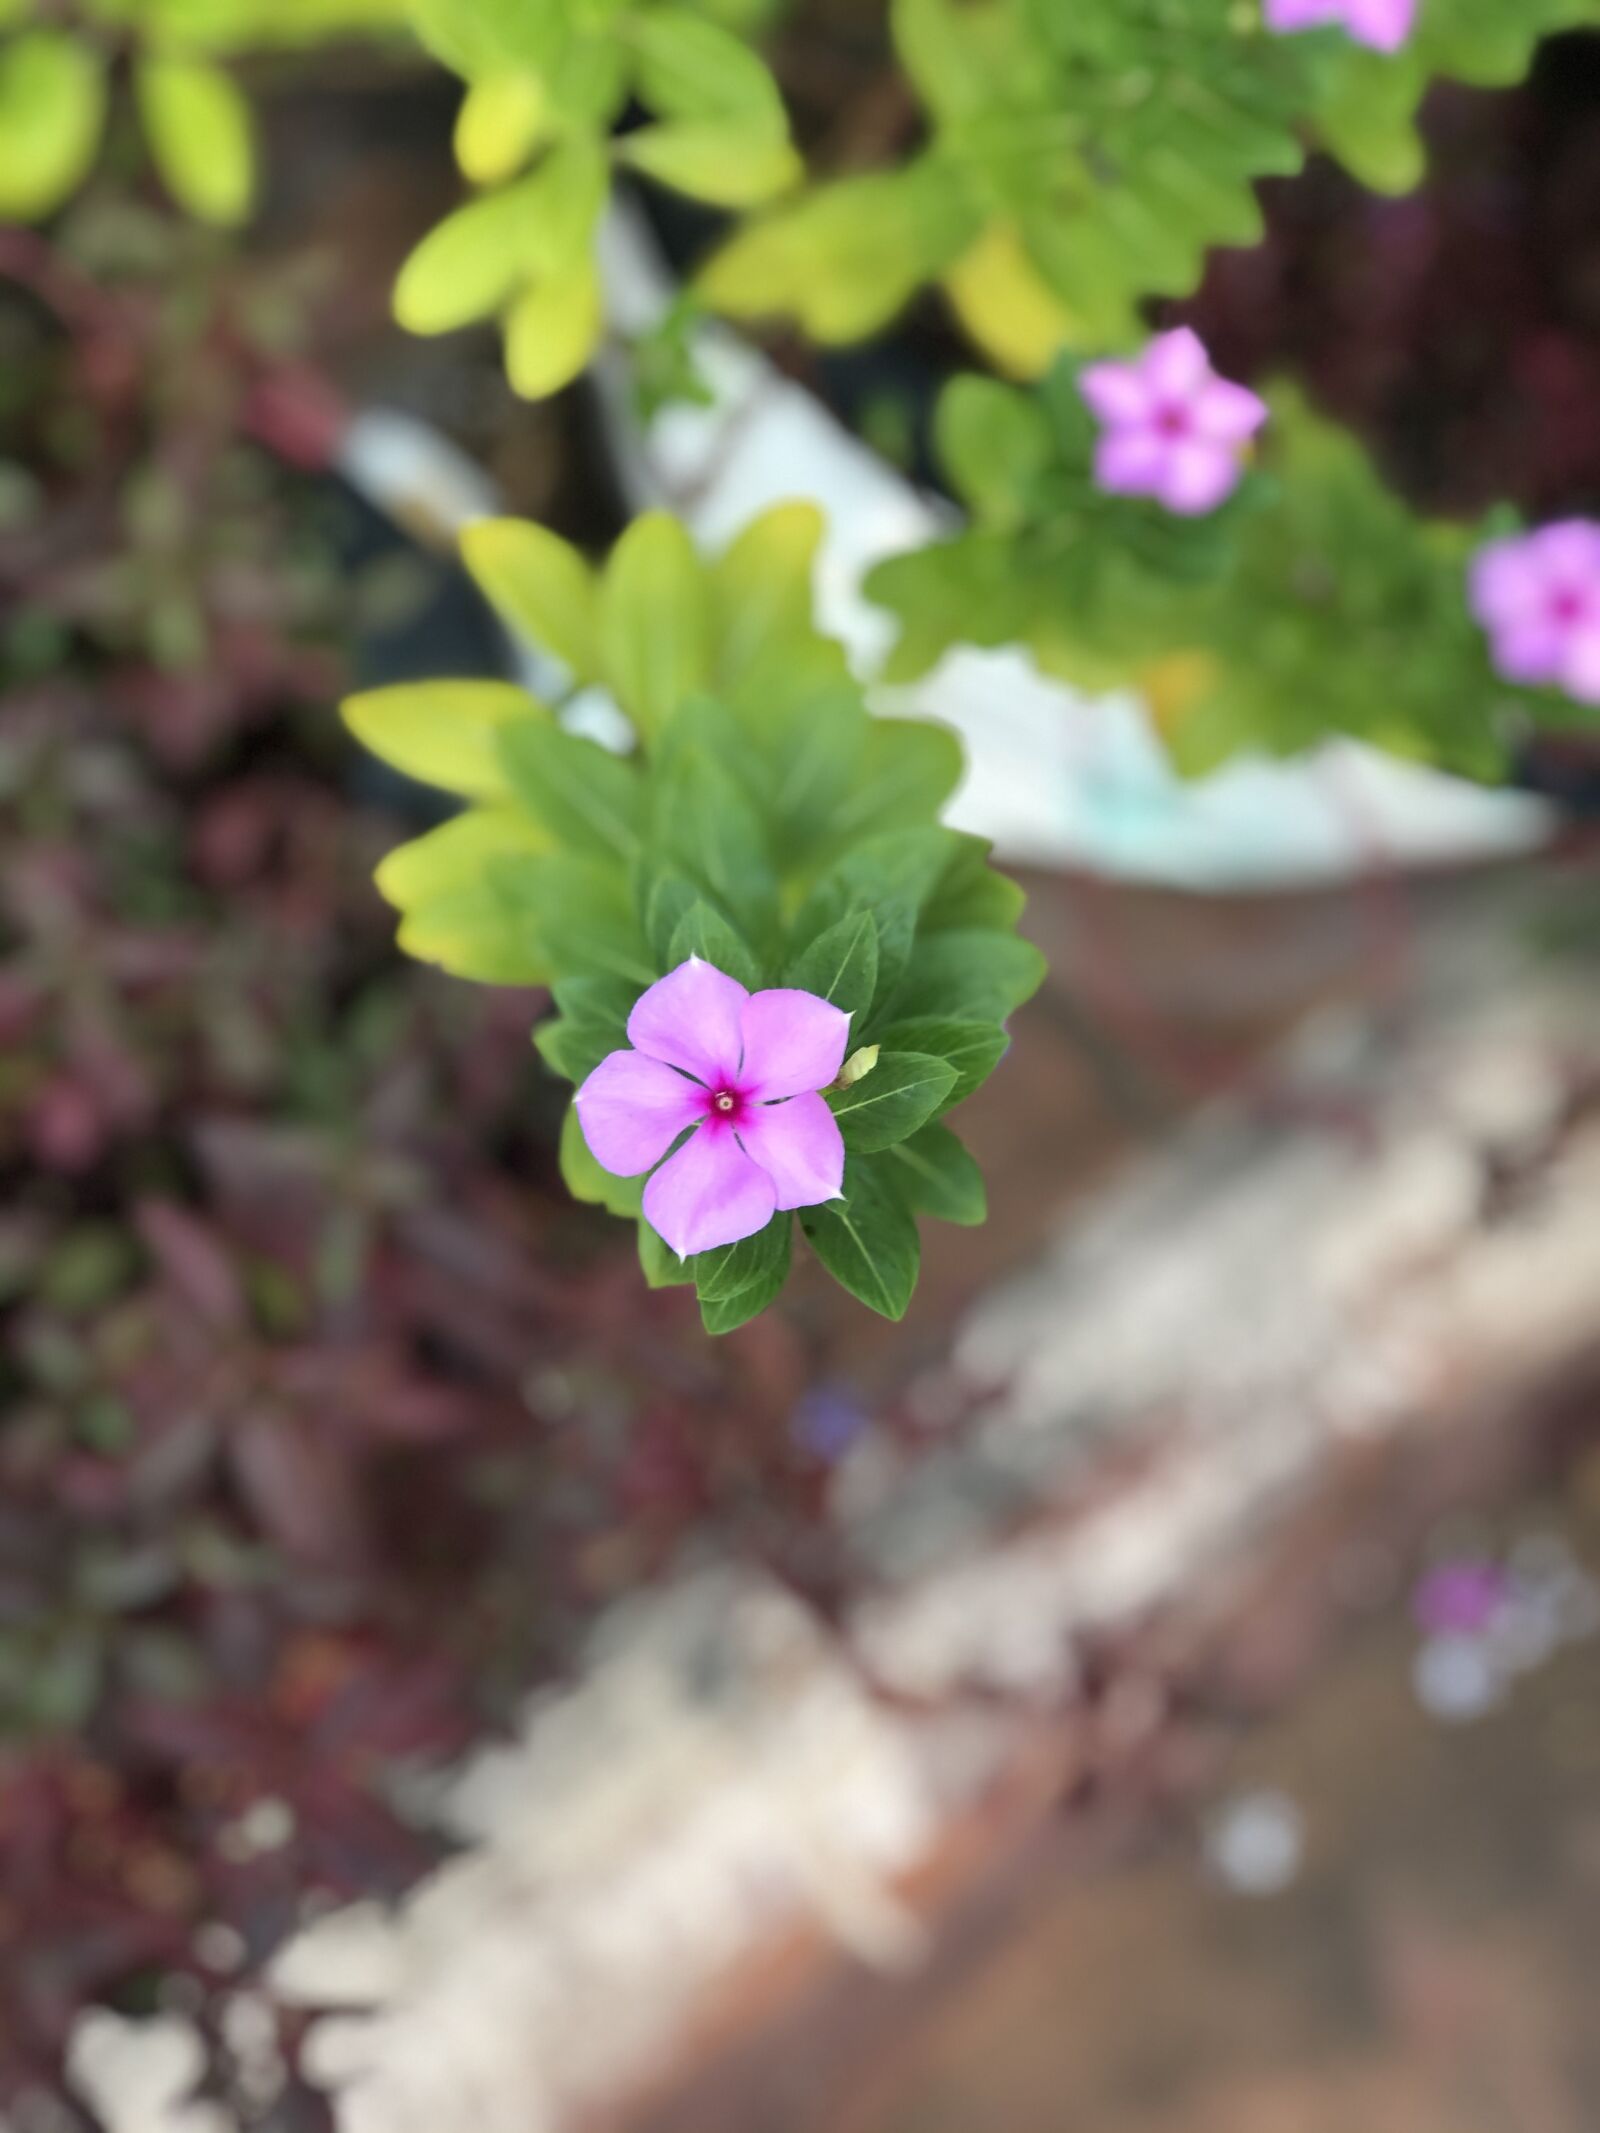 iPhone 8 Plus back dual camera 6.6mm f/2.8 sample photo. Spring, blossoms, flower photography